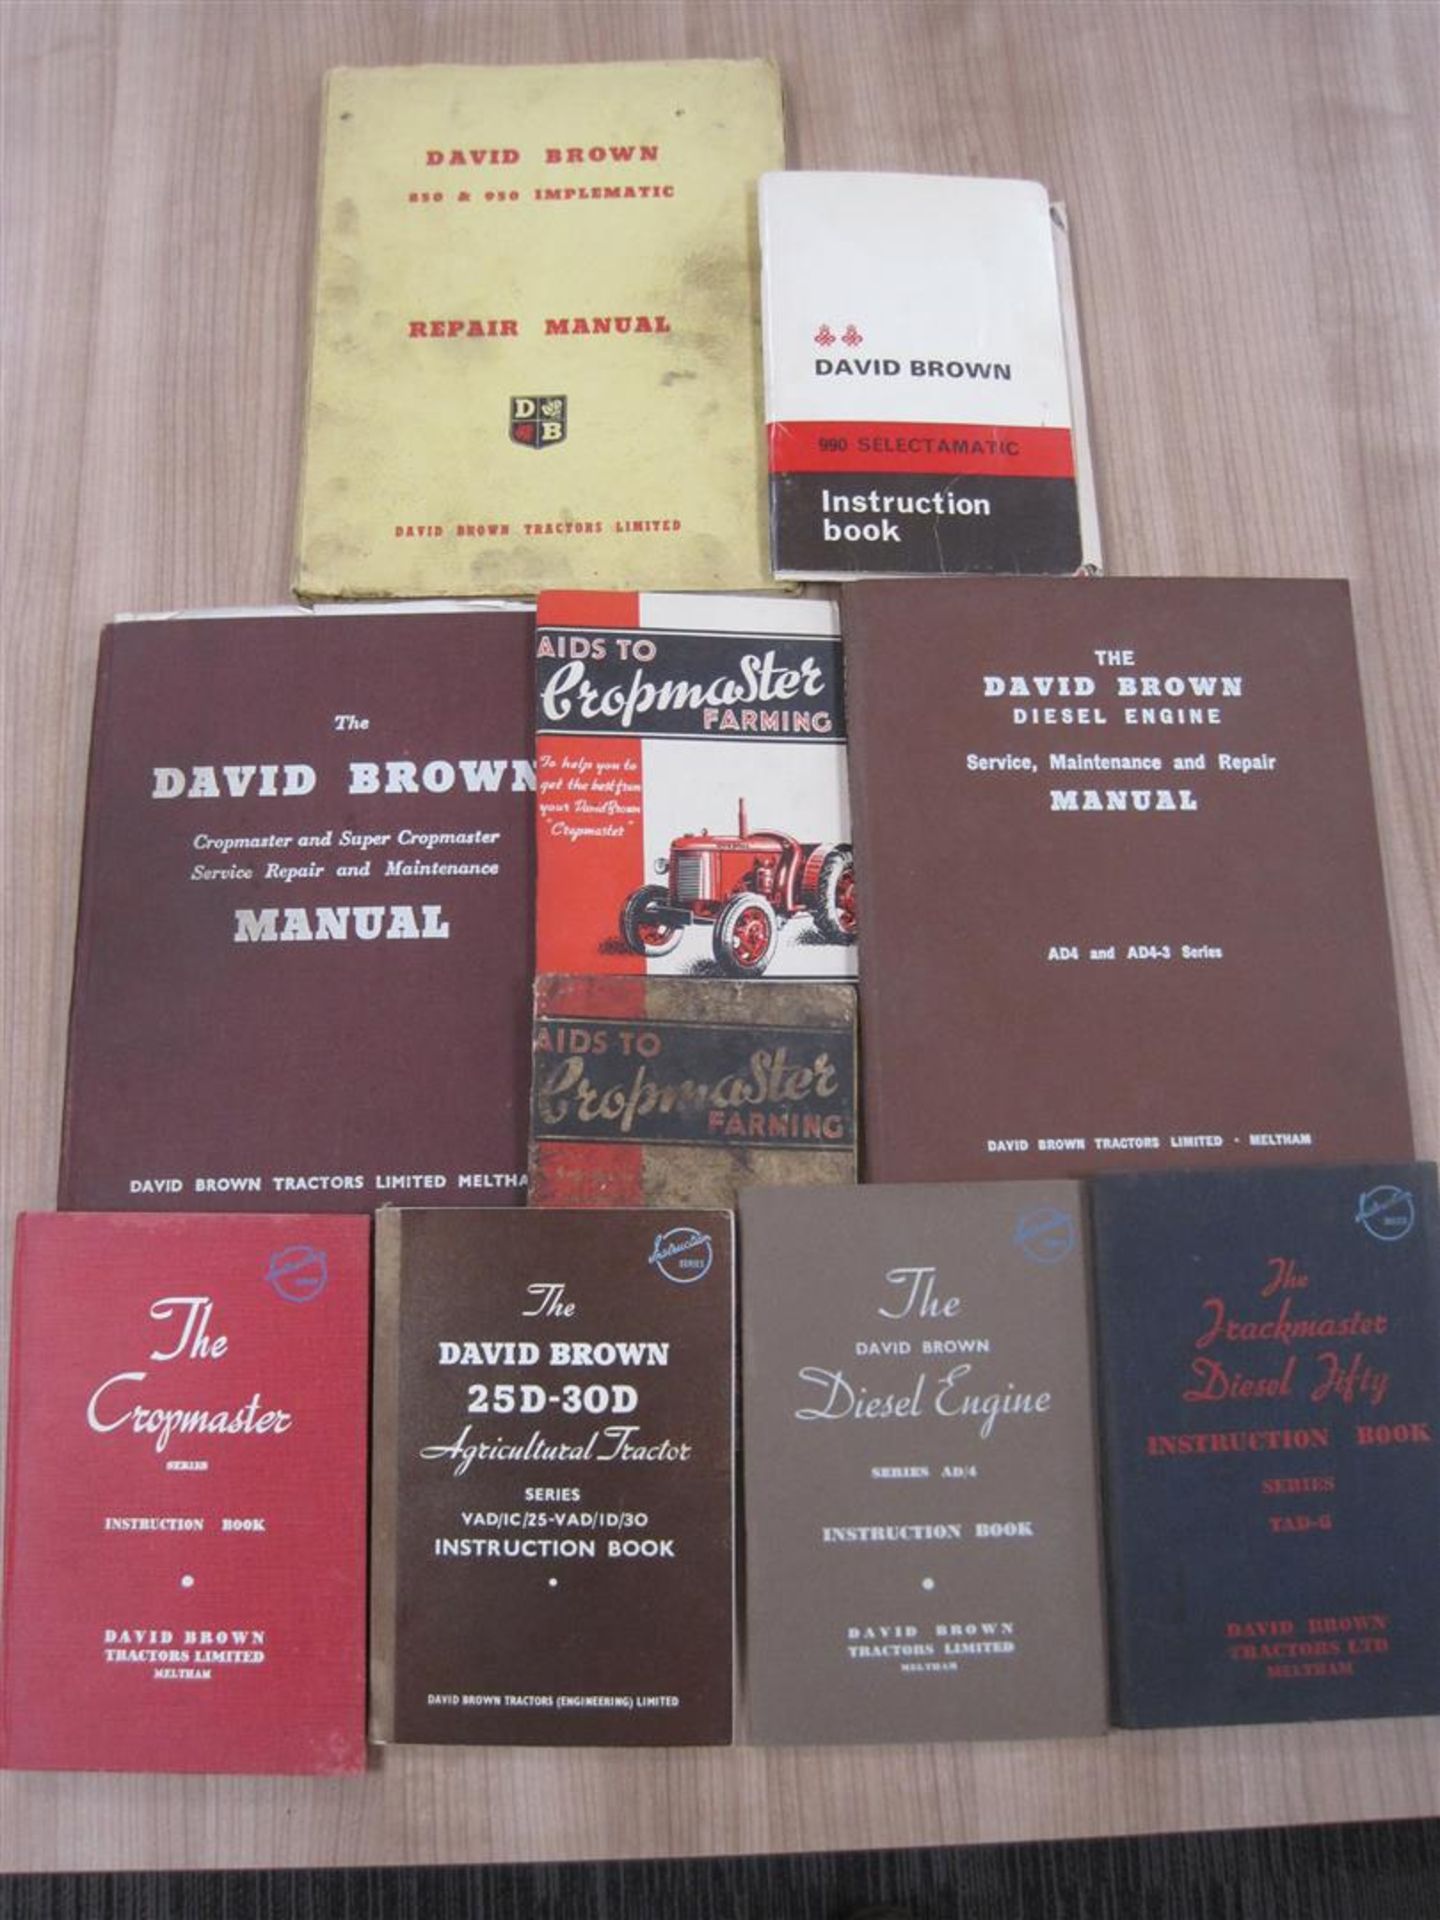 David Brown Instruction Books and manuals; 25/30D, Cropmaster, TAD-6, 850/950 Implematic, 990